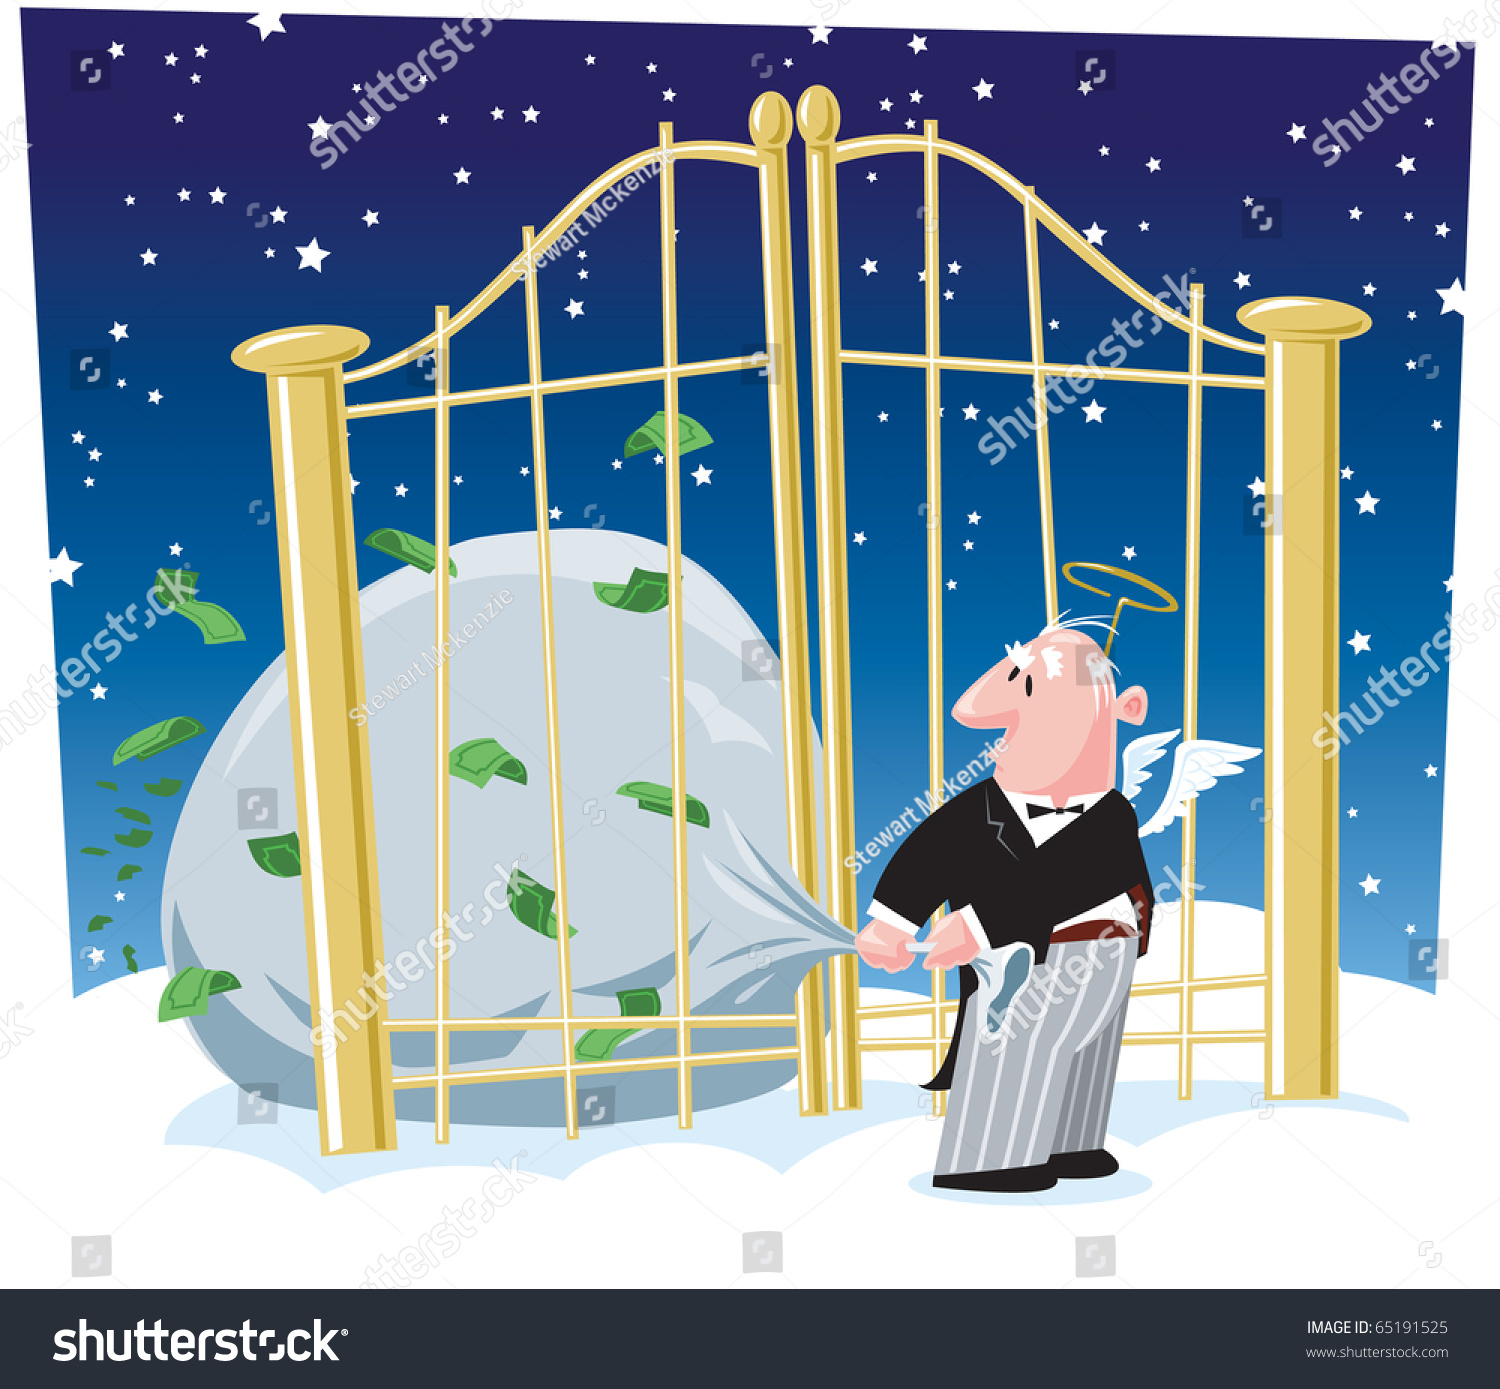 pearly gates clipart free - photo #25